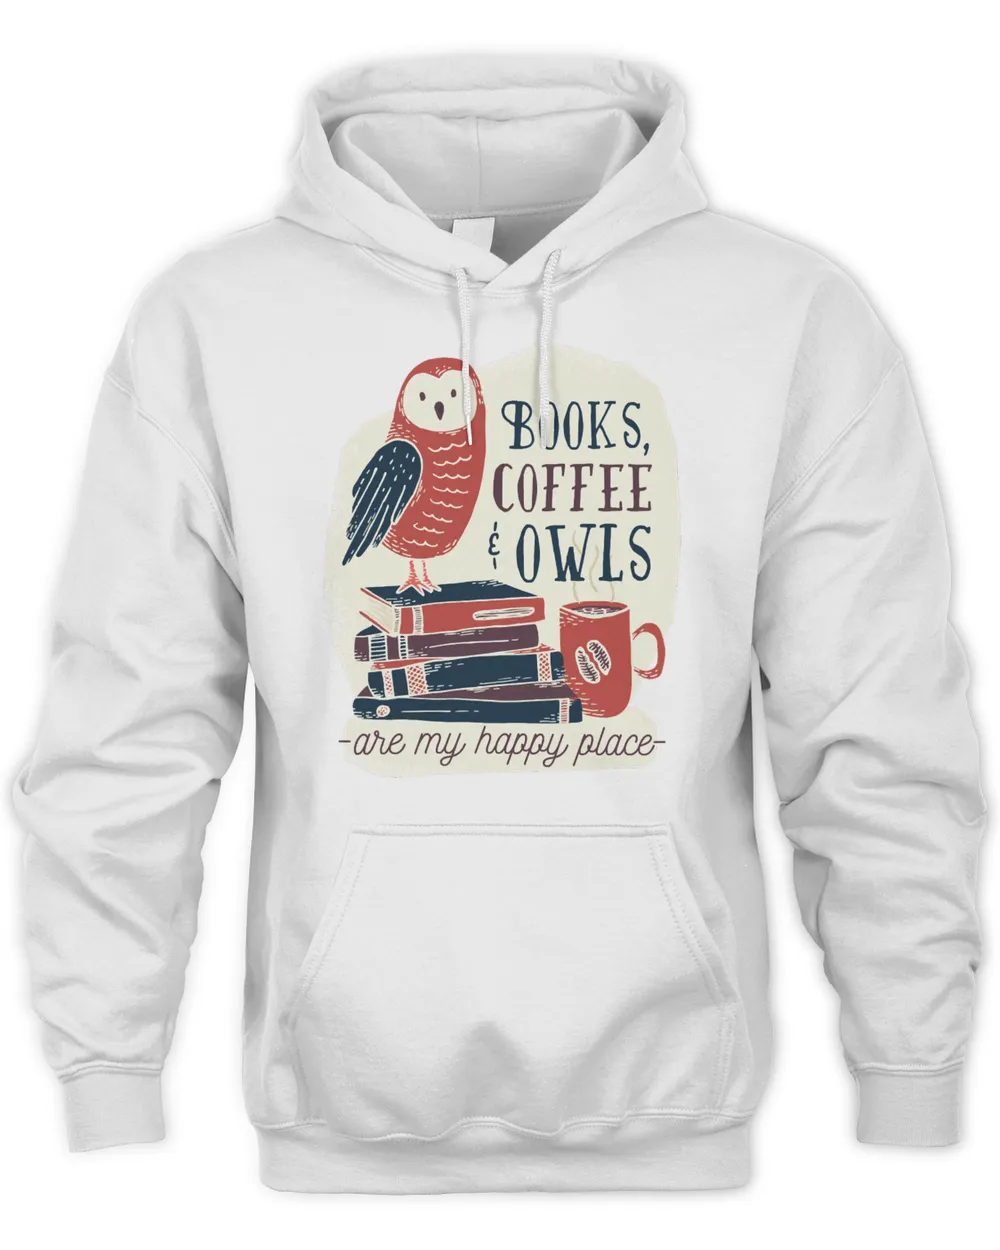 Book books and coffee owl186 booked